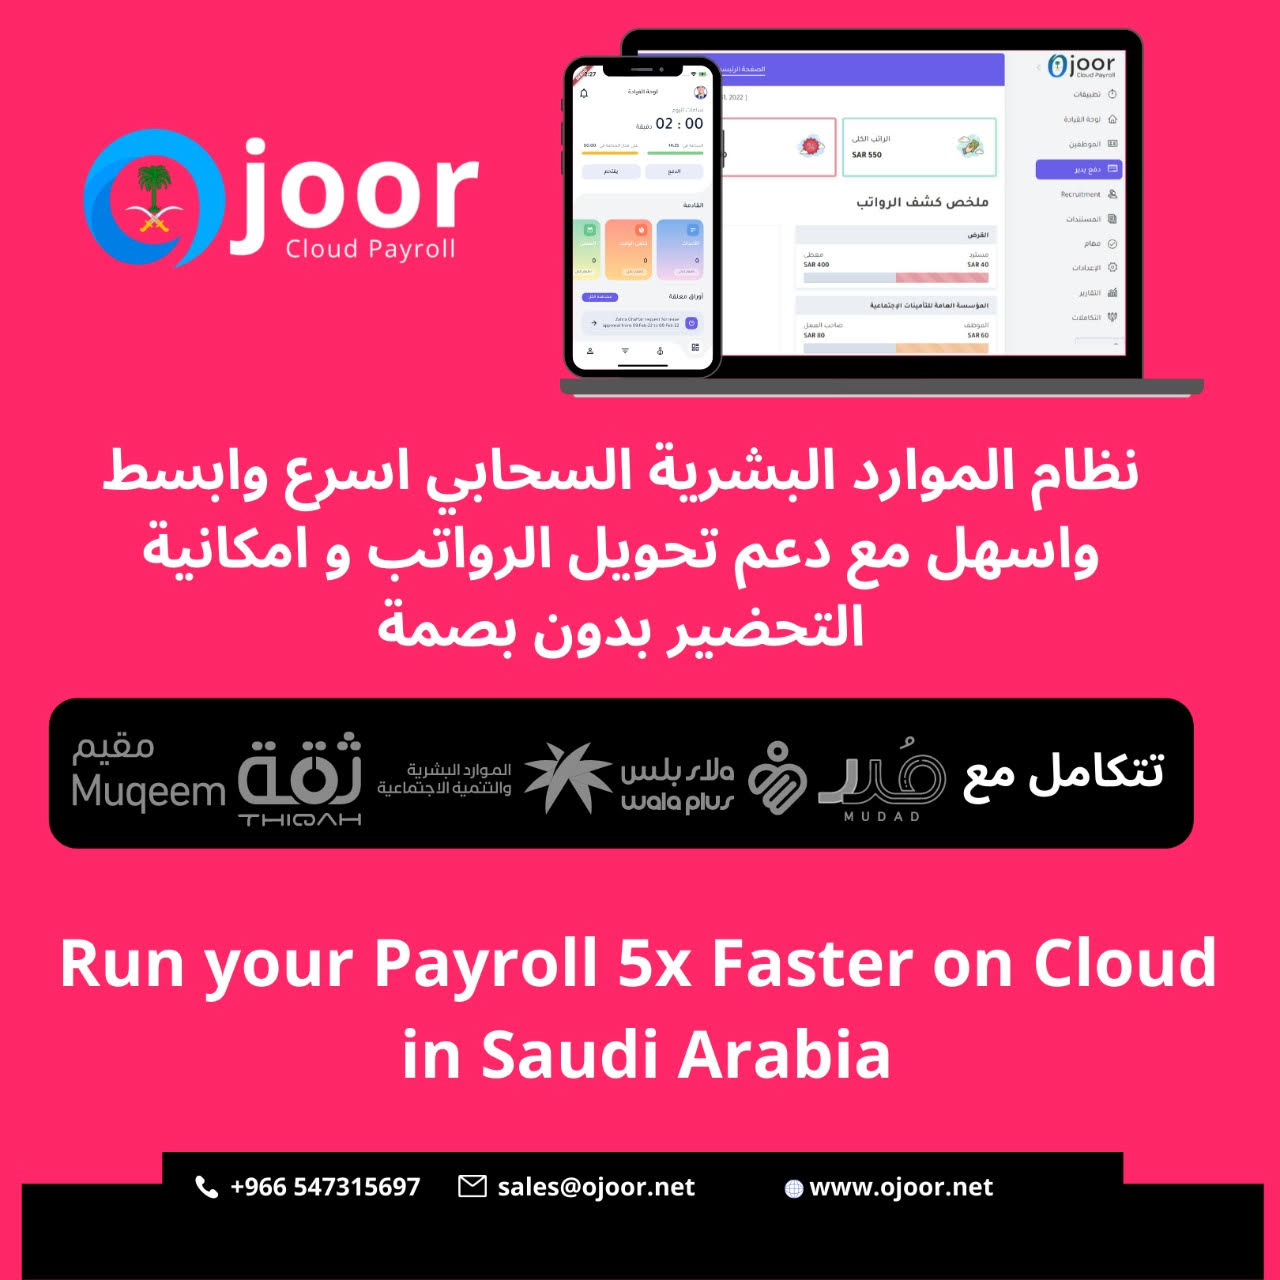 What are the benefits of implementing Payroll Software in Saudi?